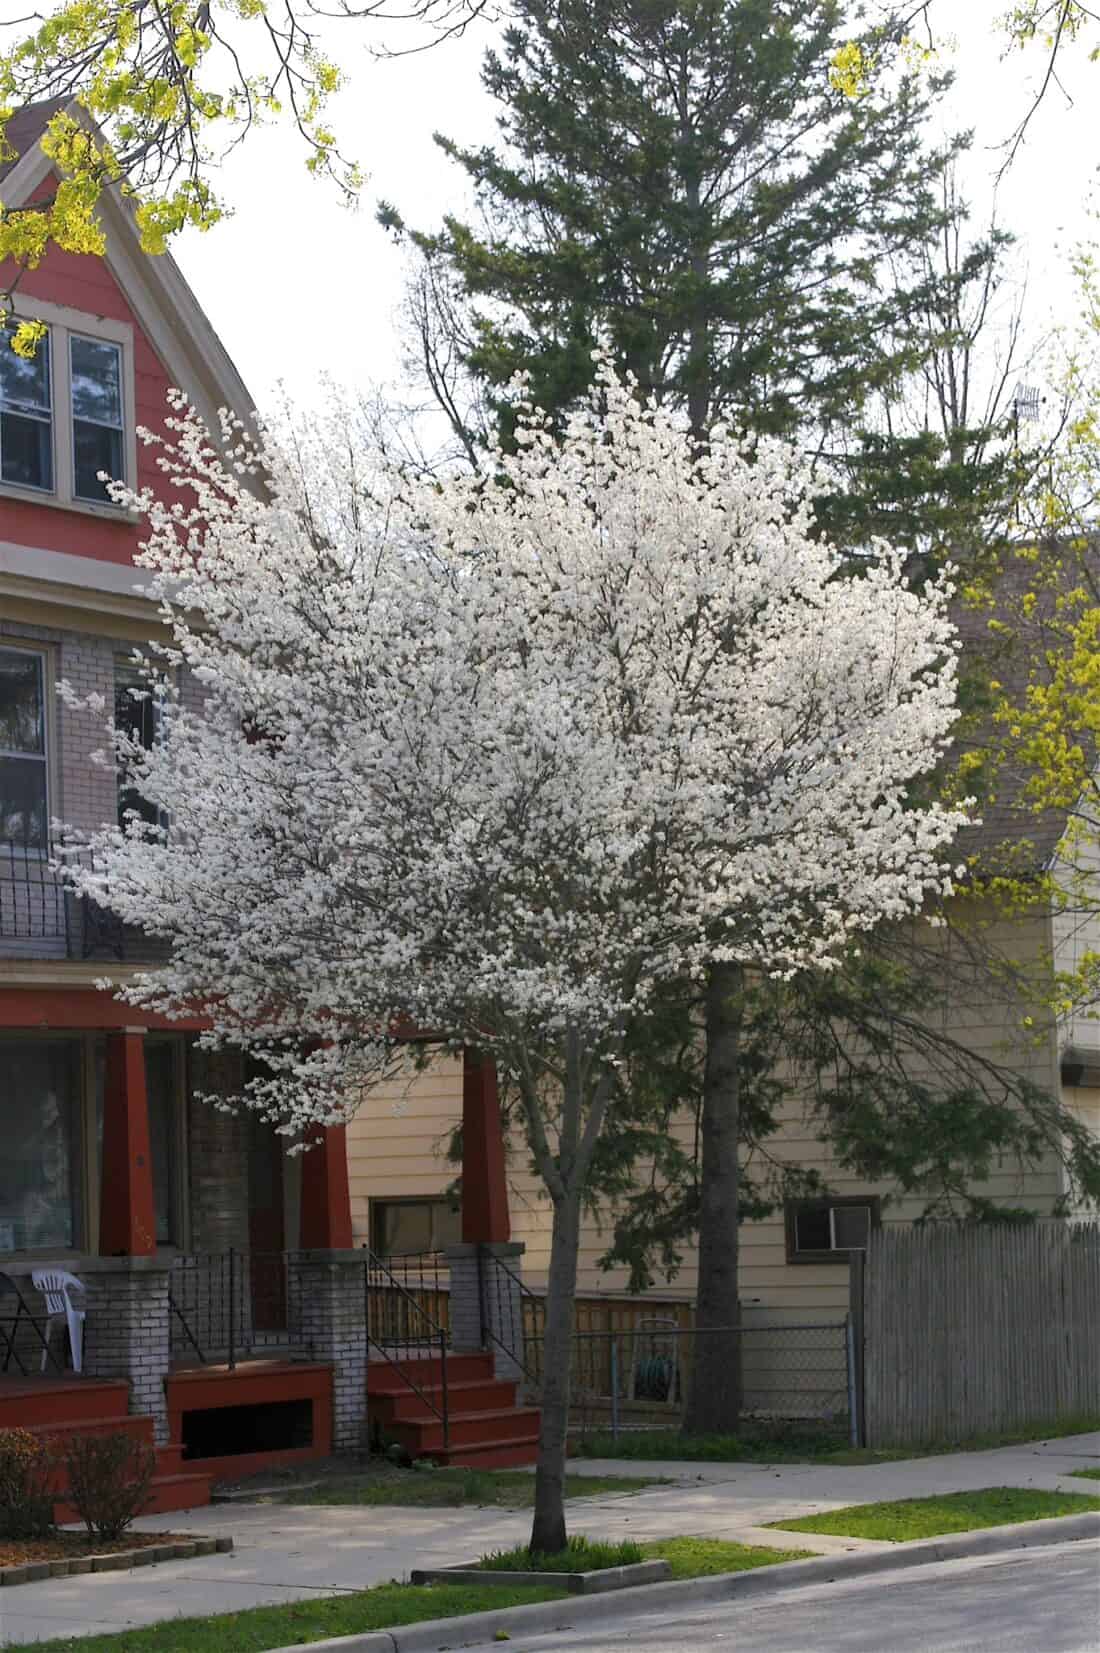 A white flowering tree in front of a house.